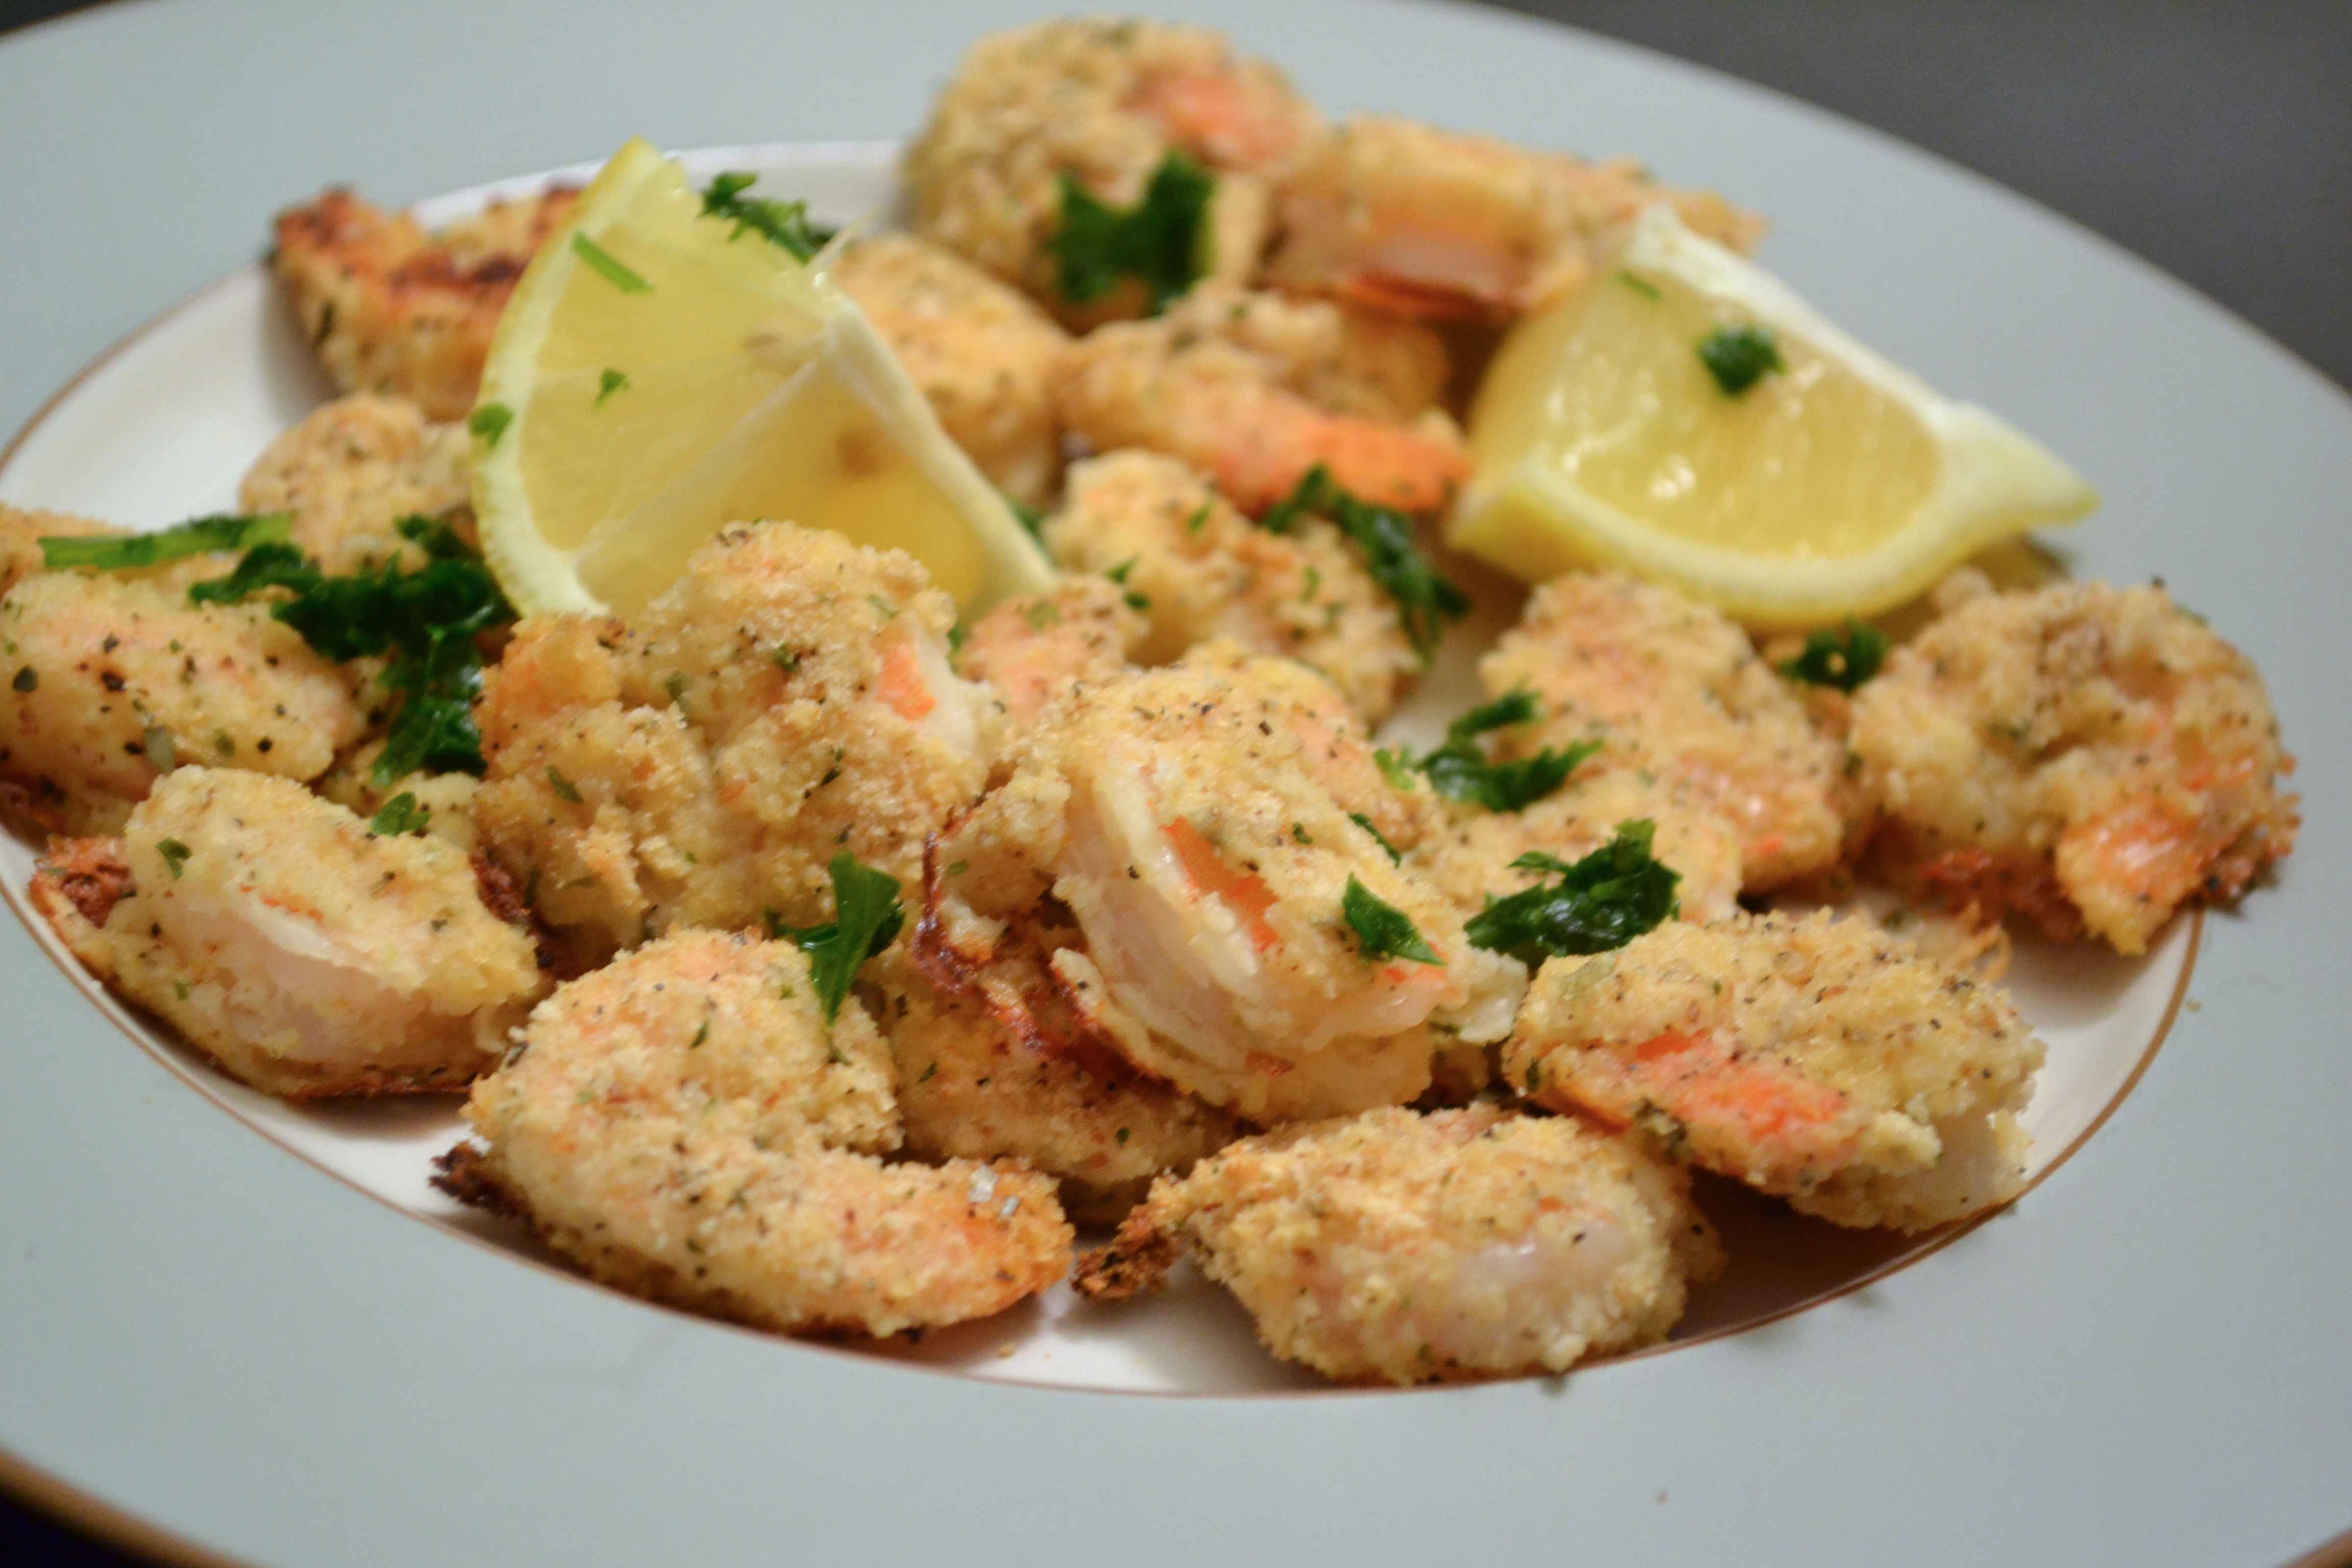 What is a recipe for garlic shrimp?